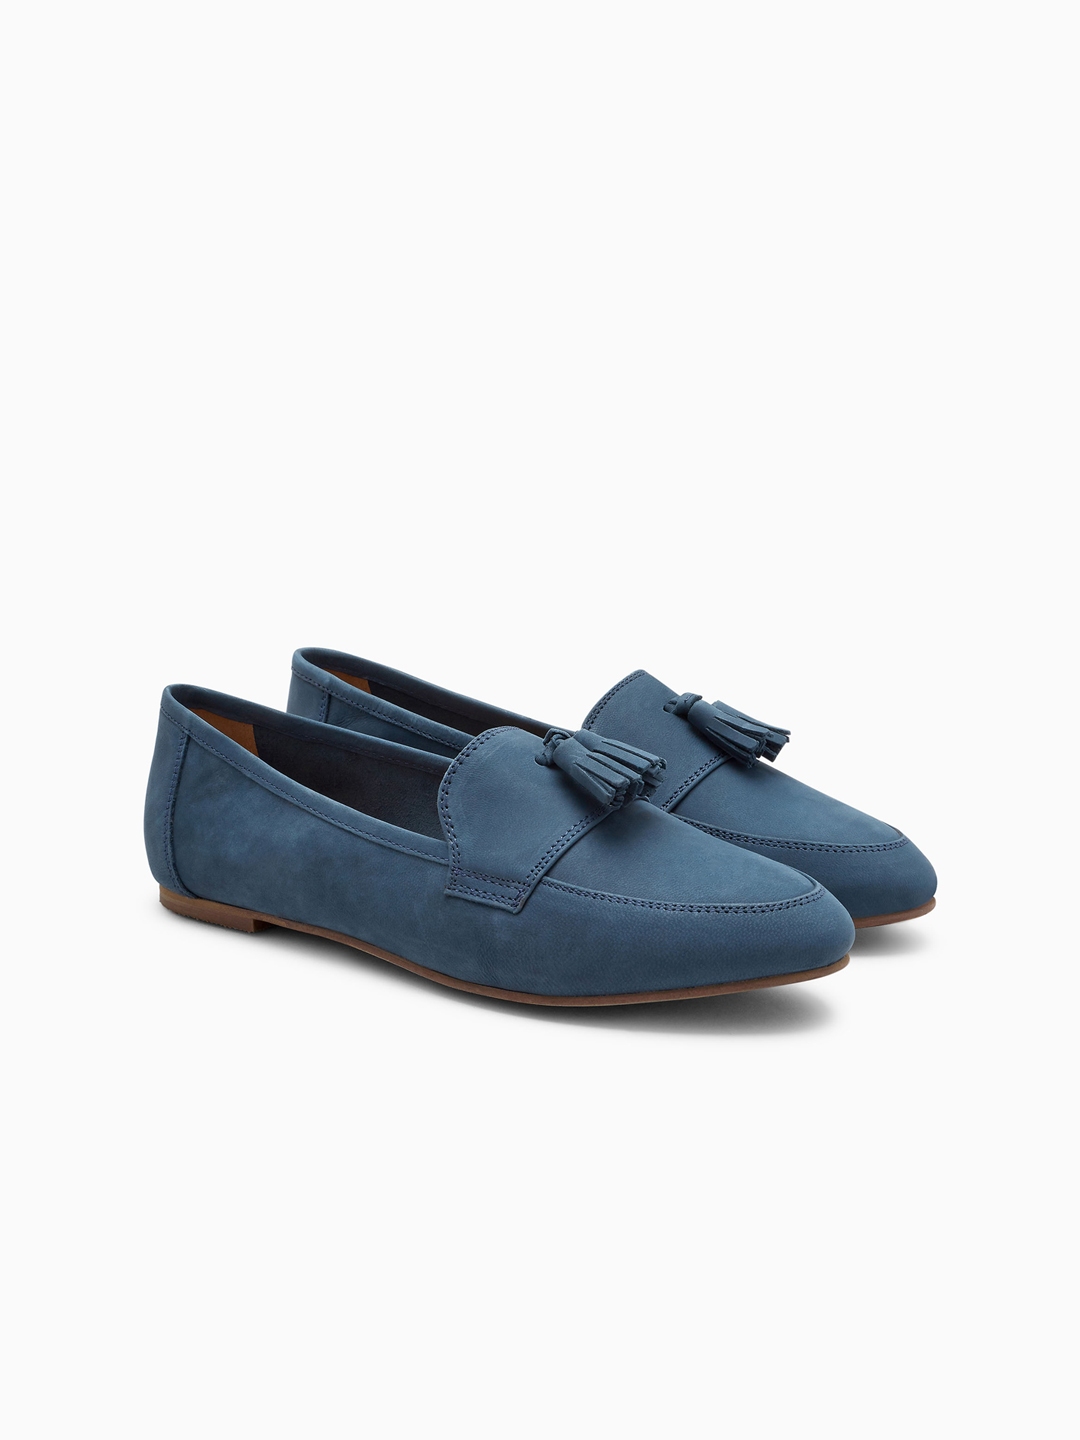 Blue Loafers - Casual Shoes for Women 